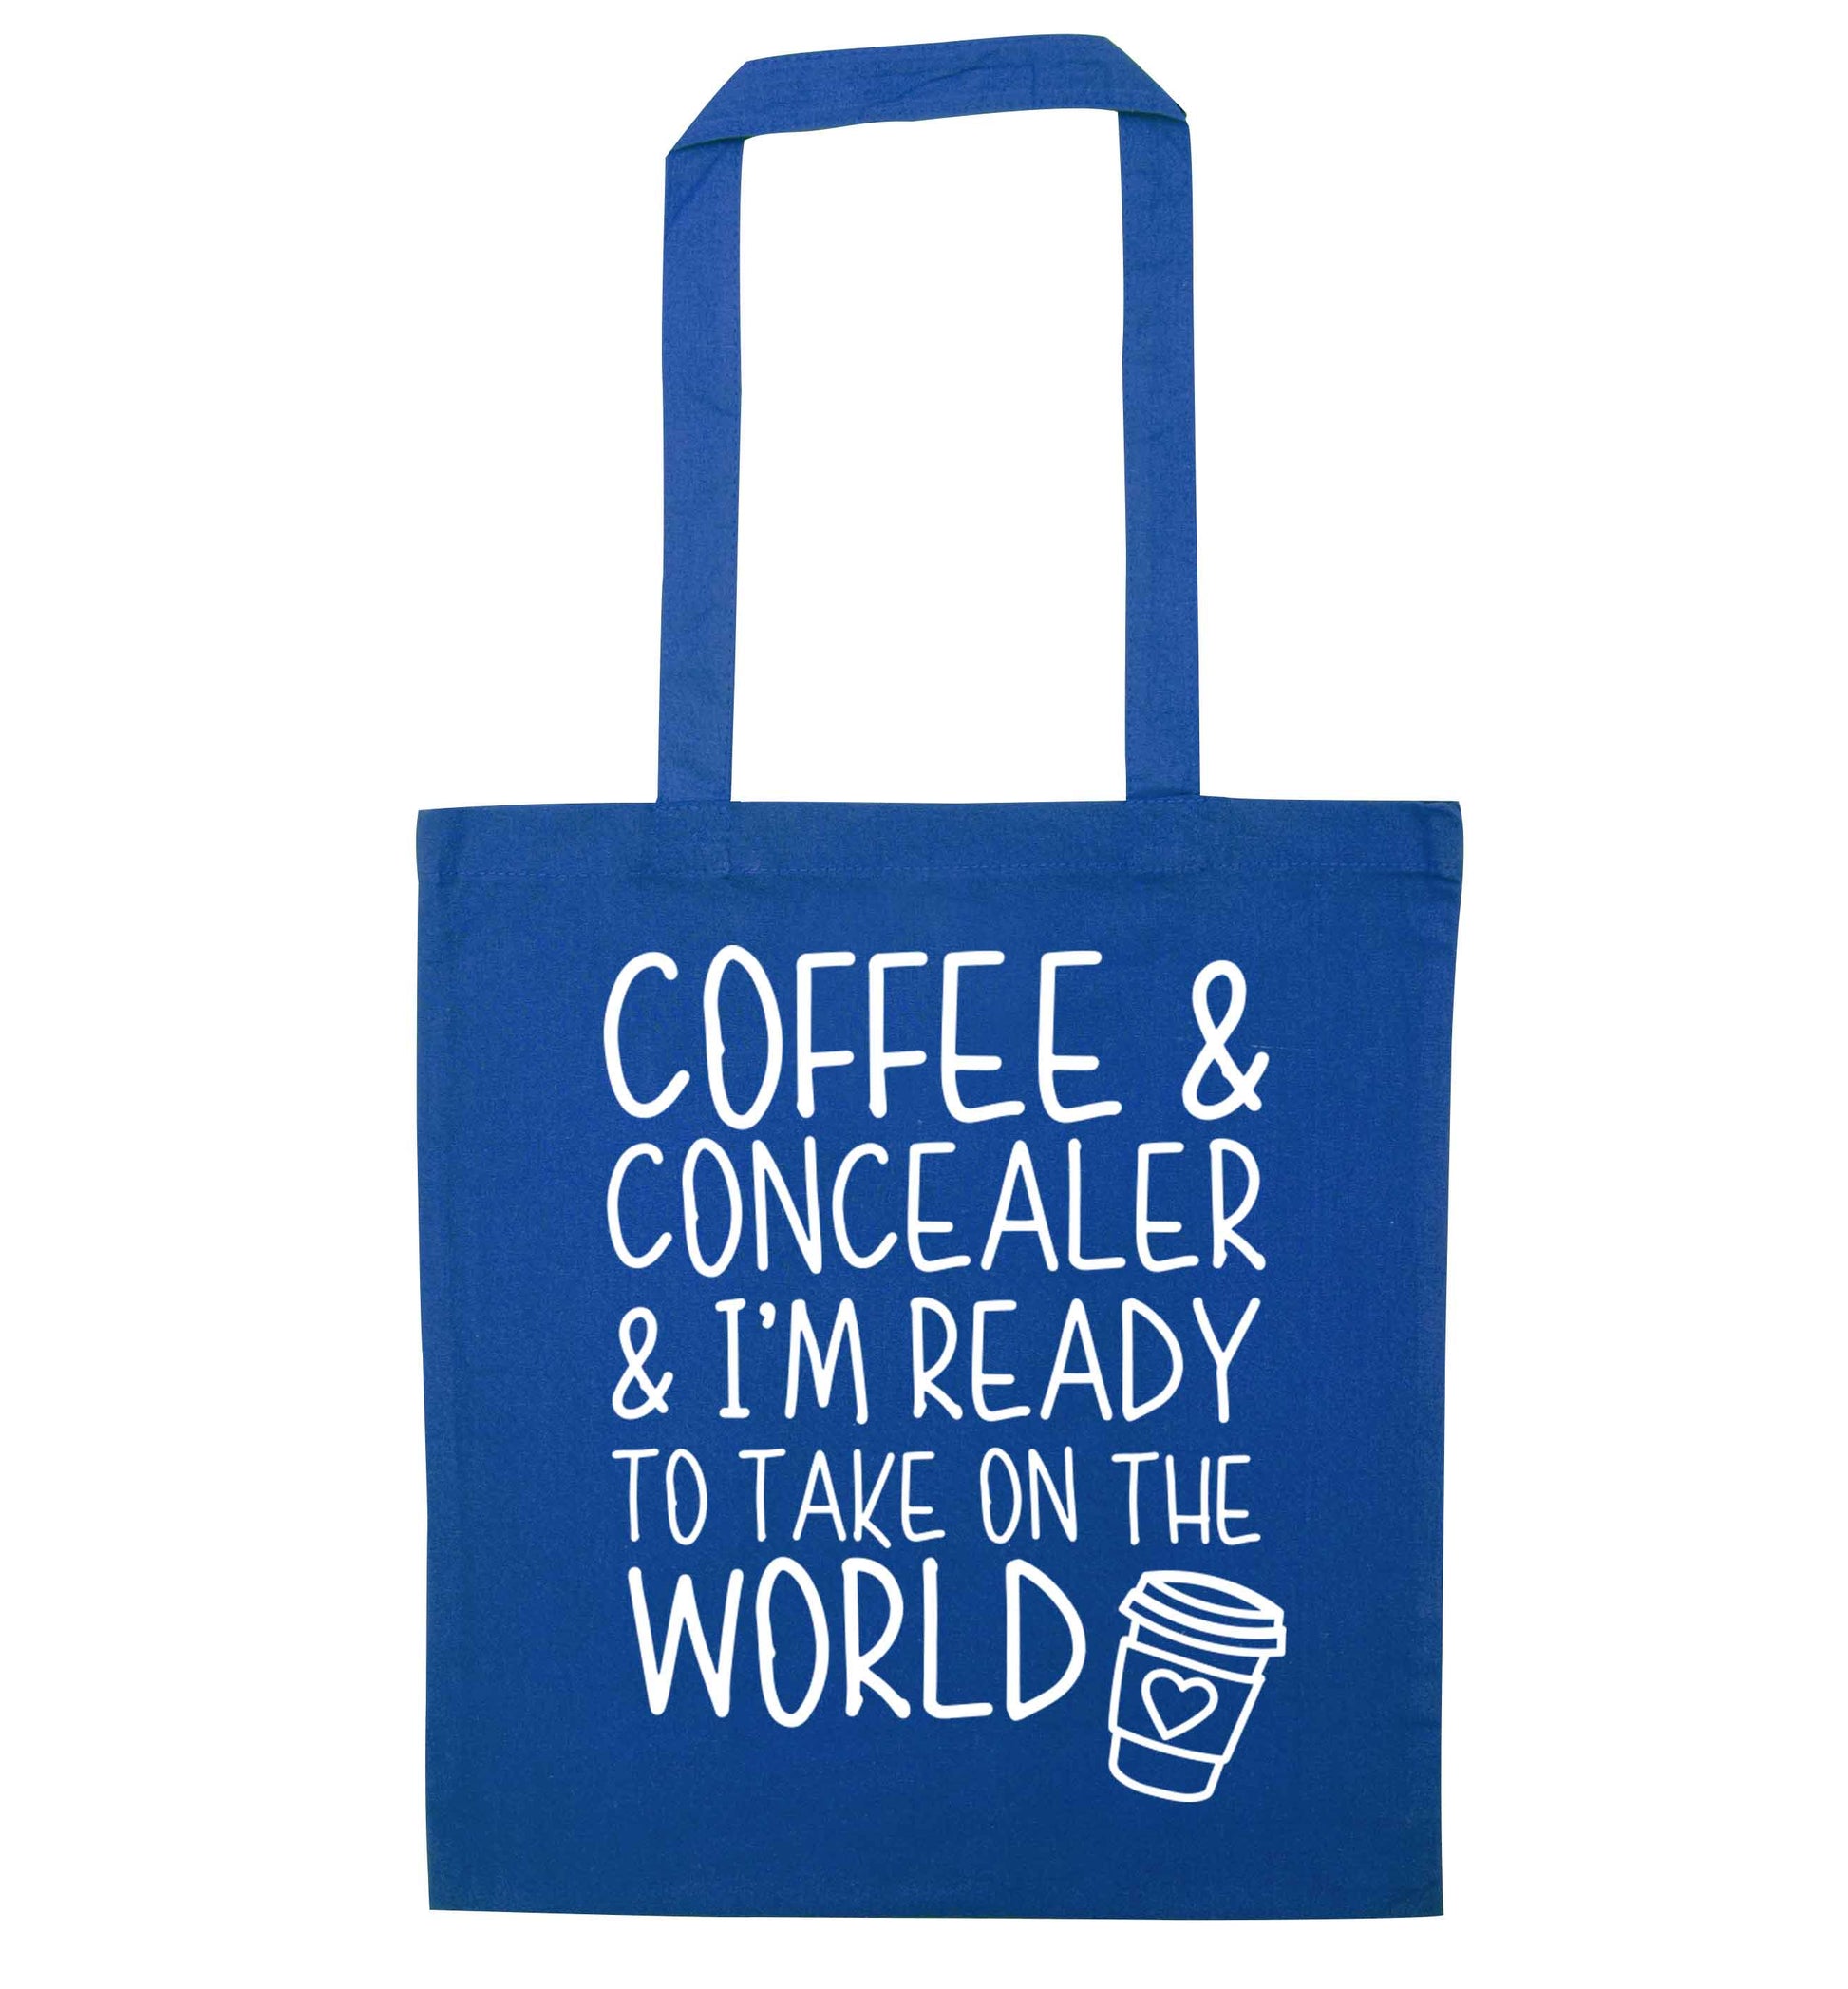 Coffee and concealer and I'm ready to take on the world blue tote bag